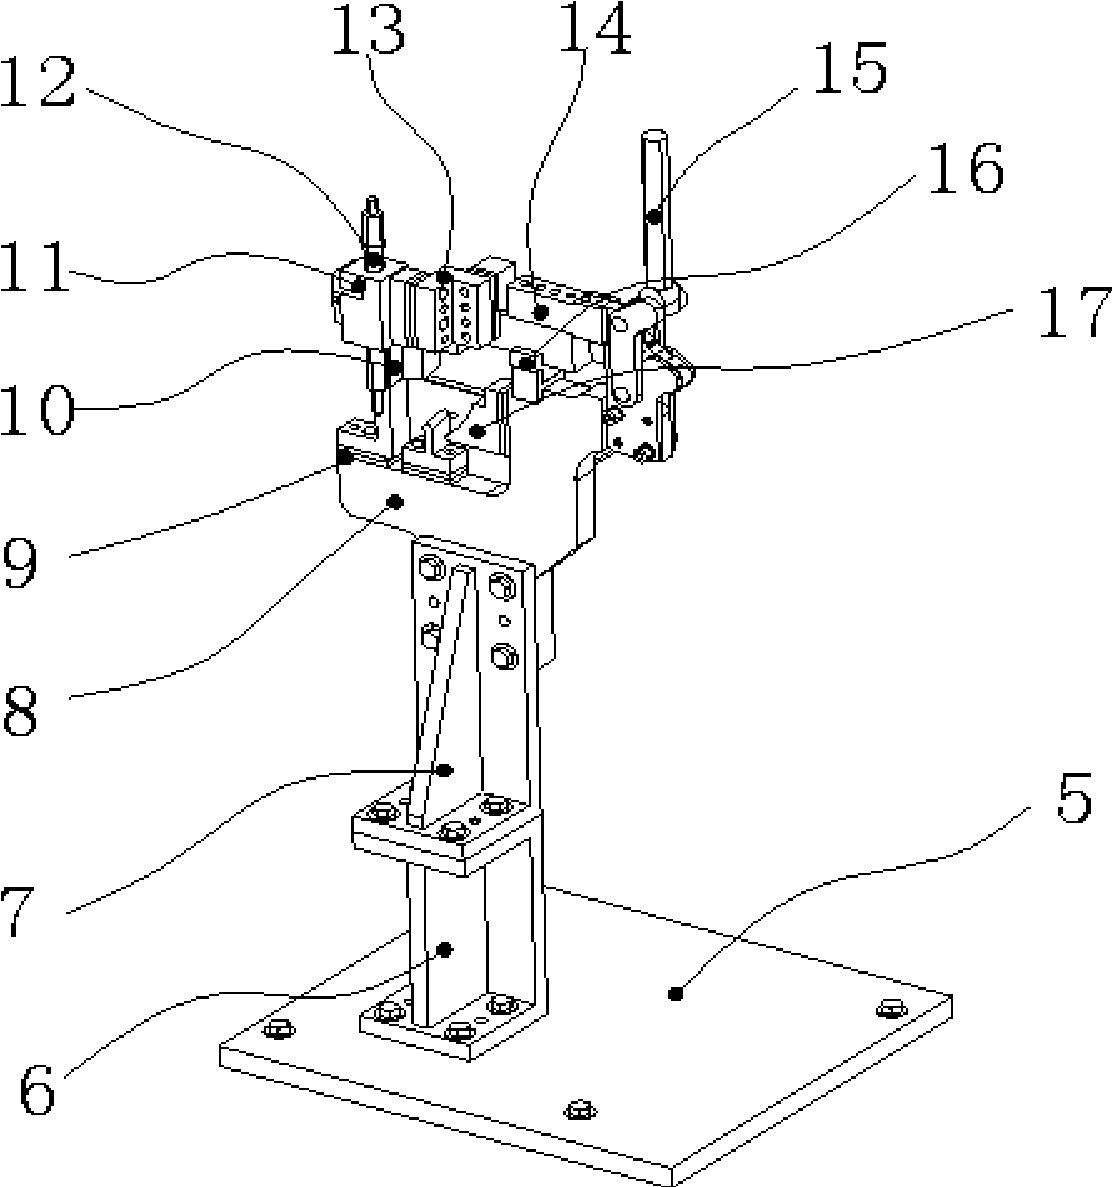 Modular design method and structure of welding fixture for trial-manufacture sample vehicles